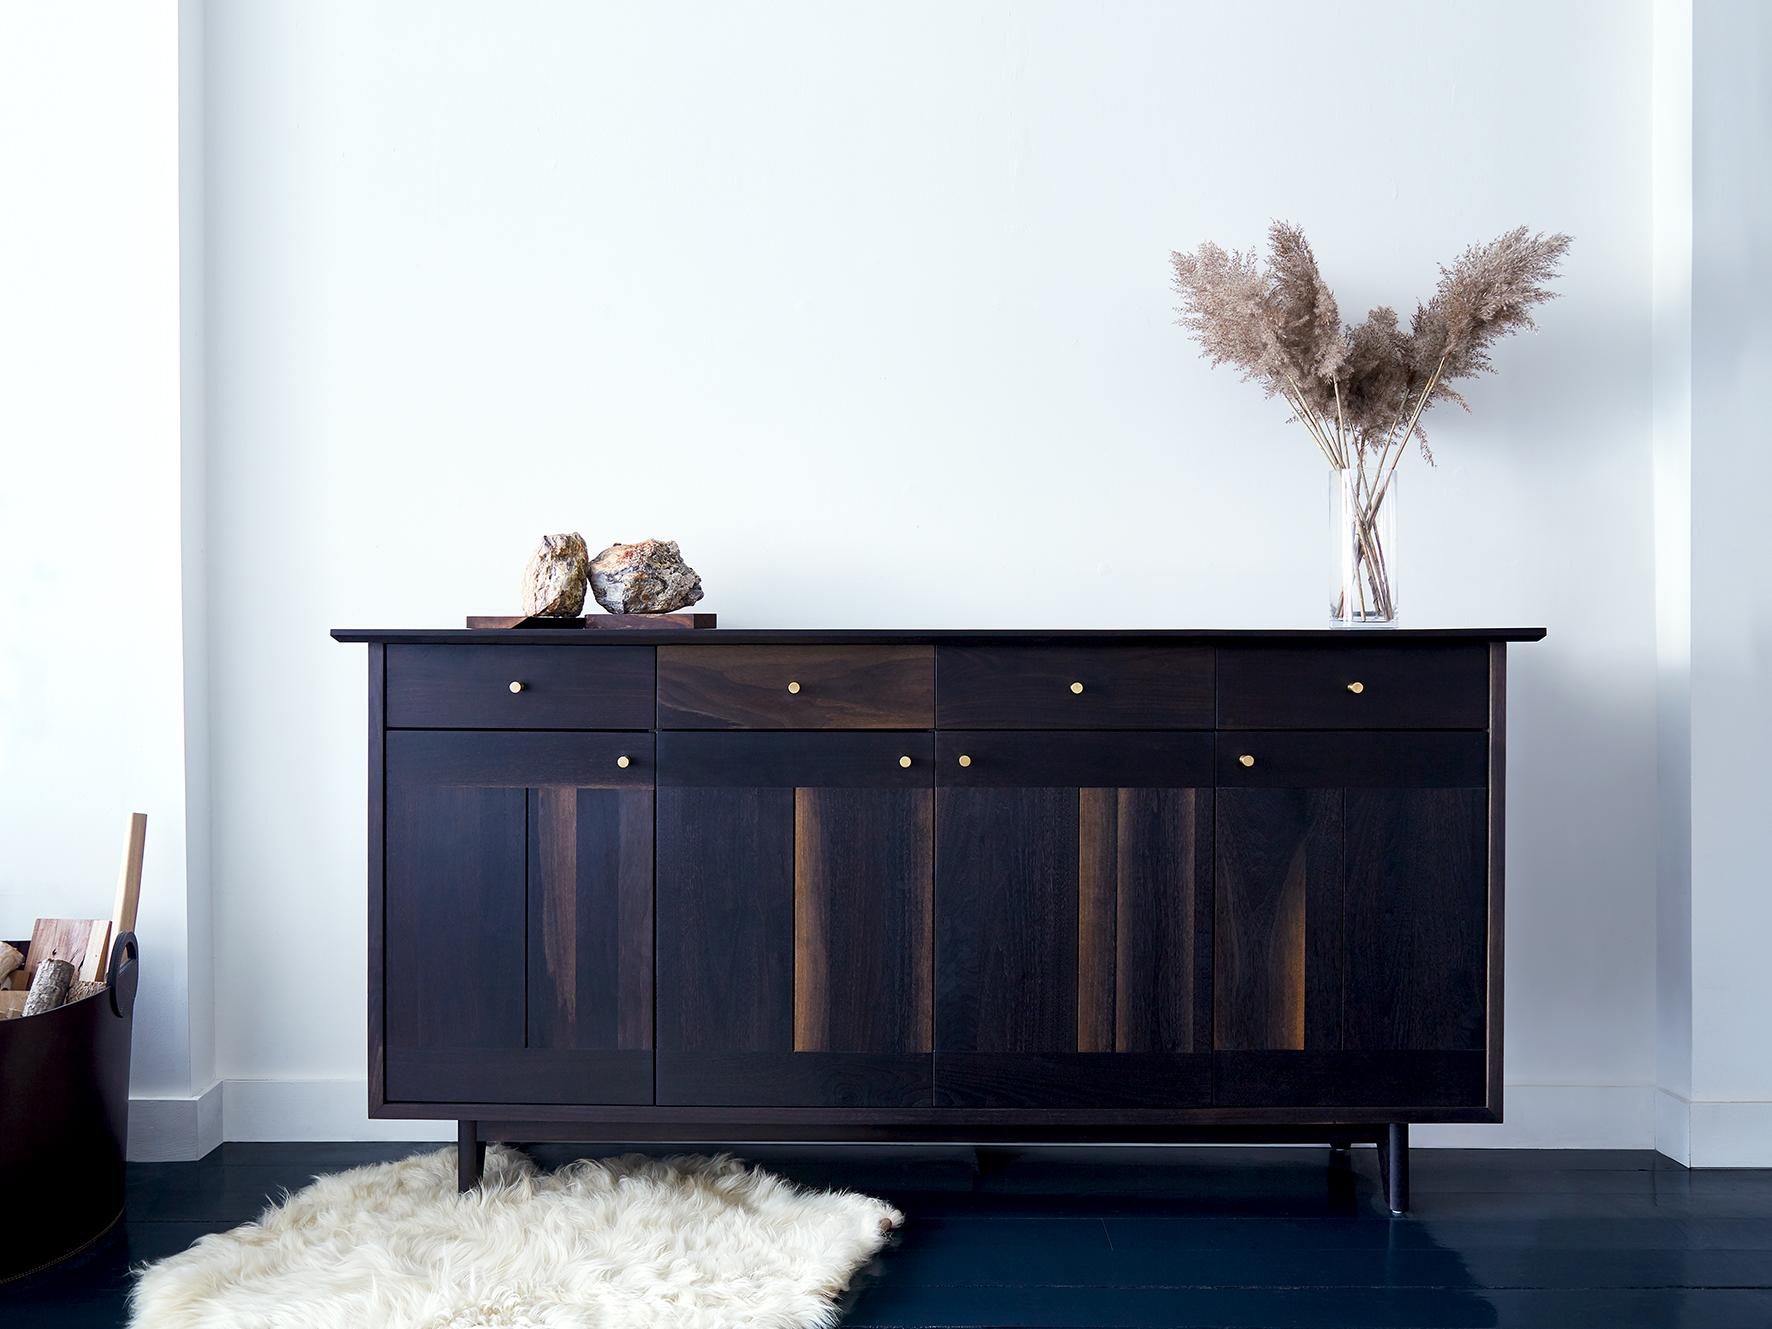 The spring sideboard features leather or turned hardwood or brass pulls. Available in Claro walnut, Eastern black walnut, maple (natural, bleached, or oxidized), cherry and white oak (natural or oxidized).

Casing available in Bleached Maple,